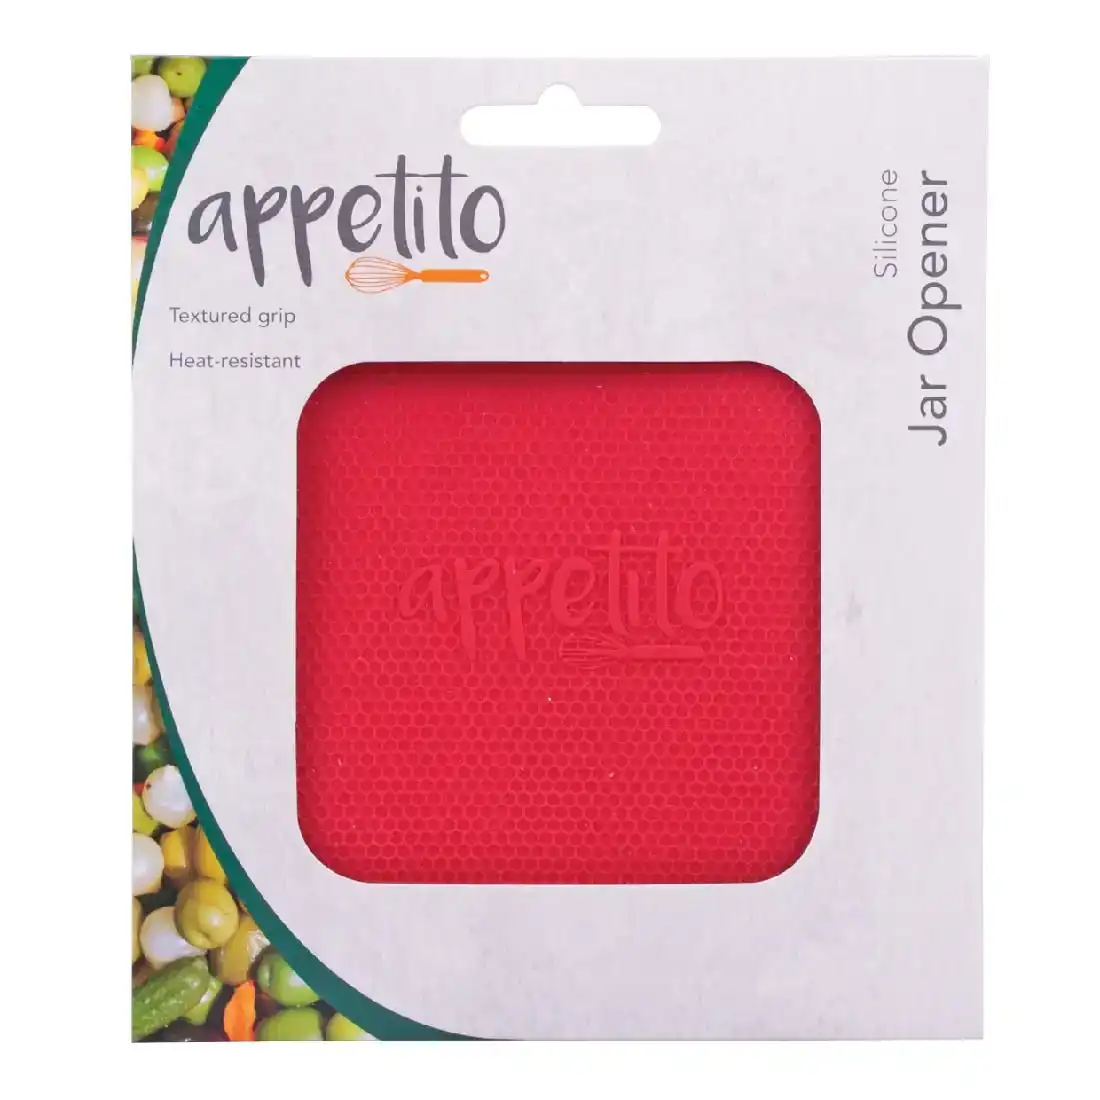 Appetito Silicone Jar Operner Mat Red